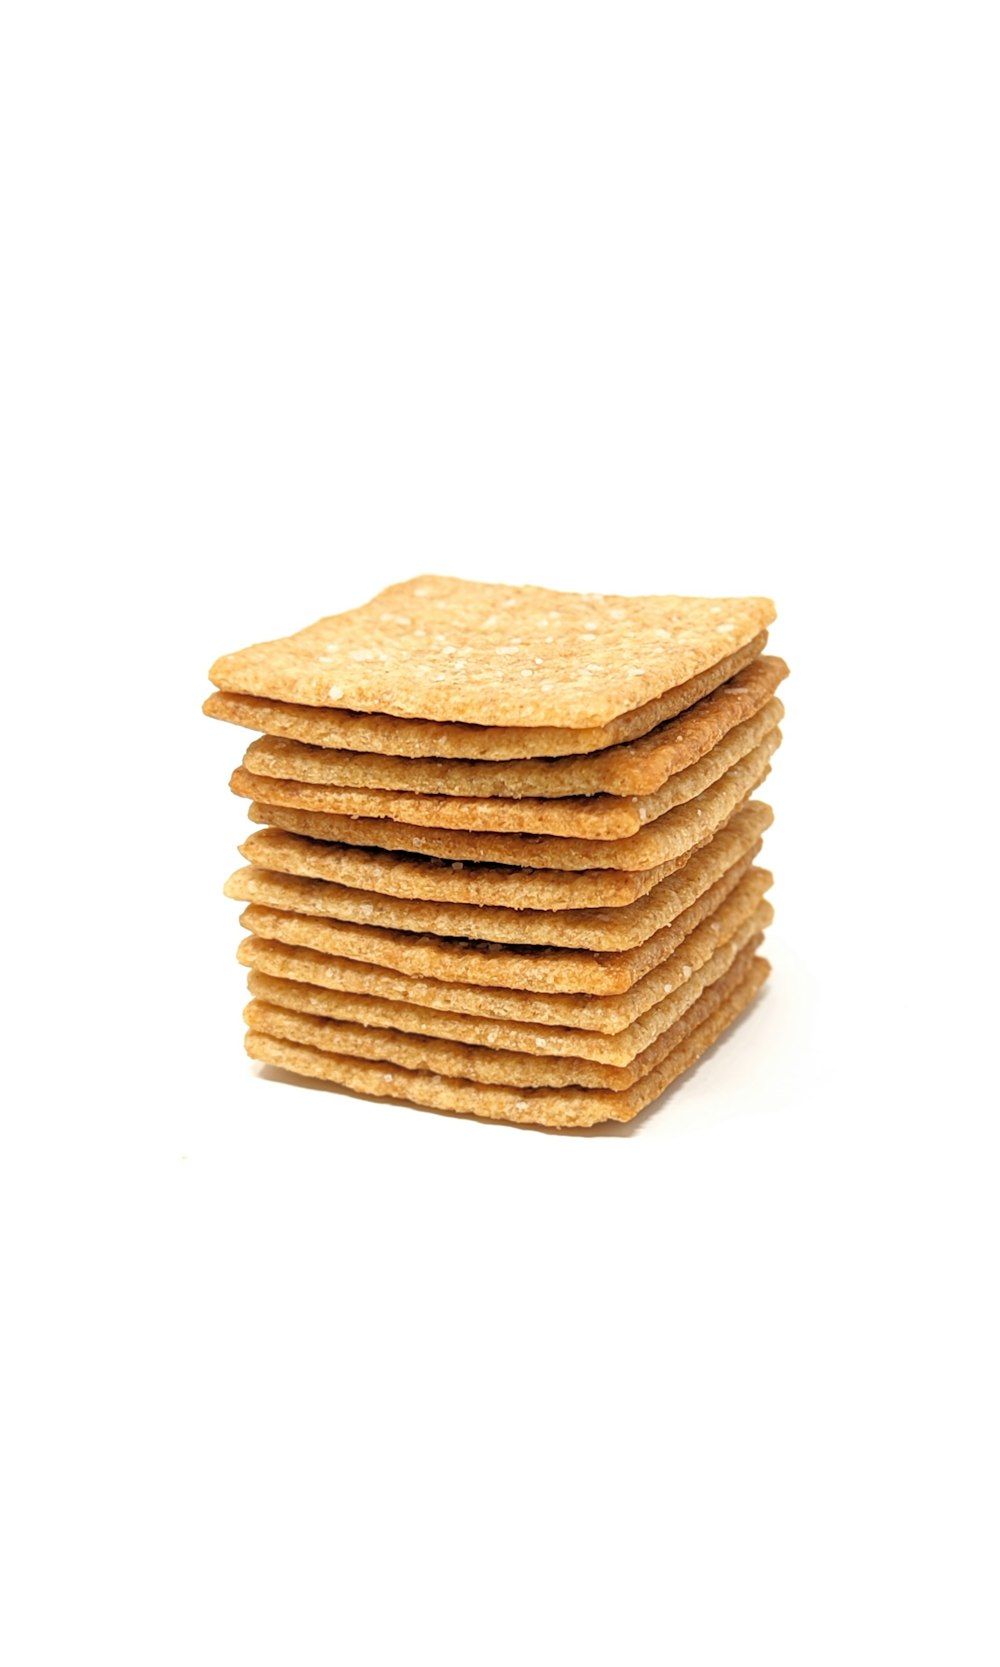 a stack of crackers on a white background